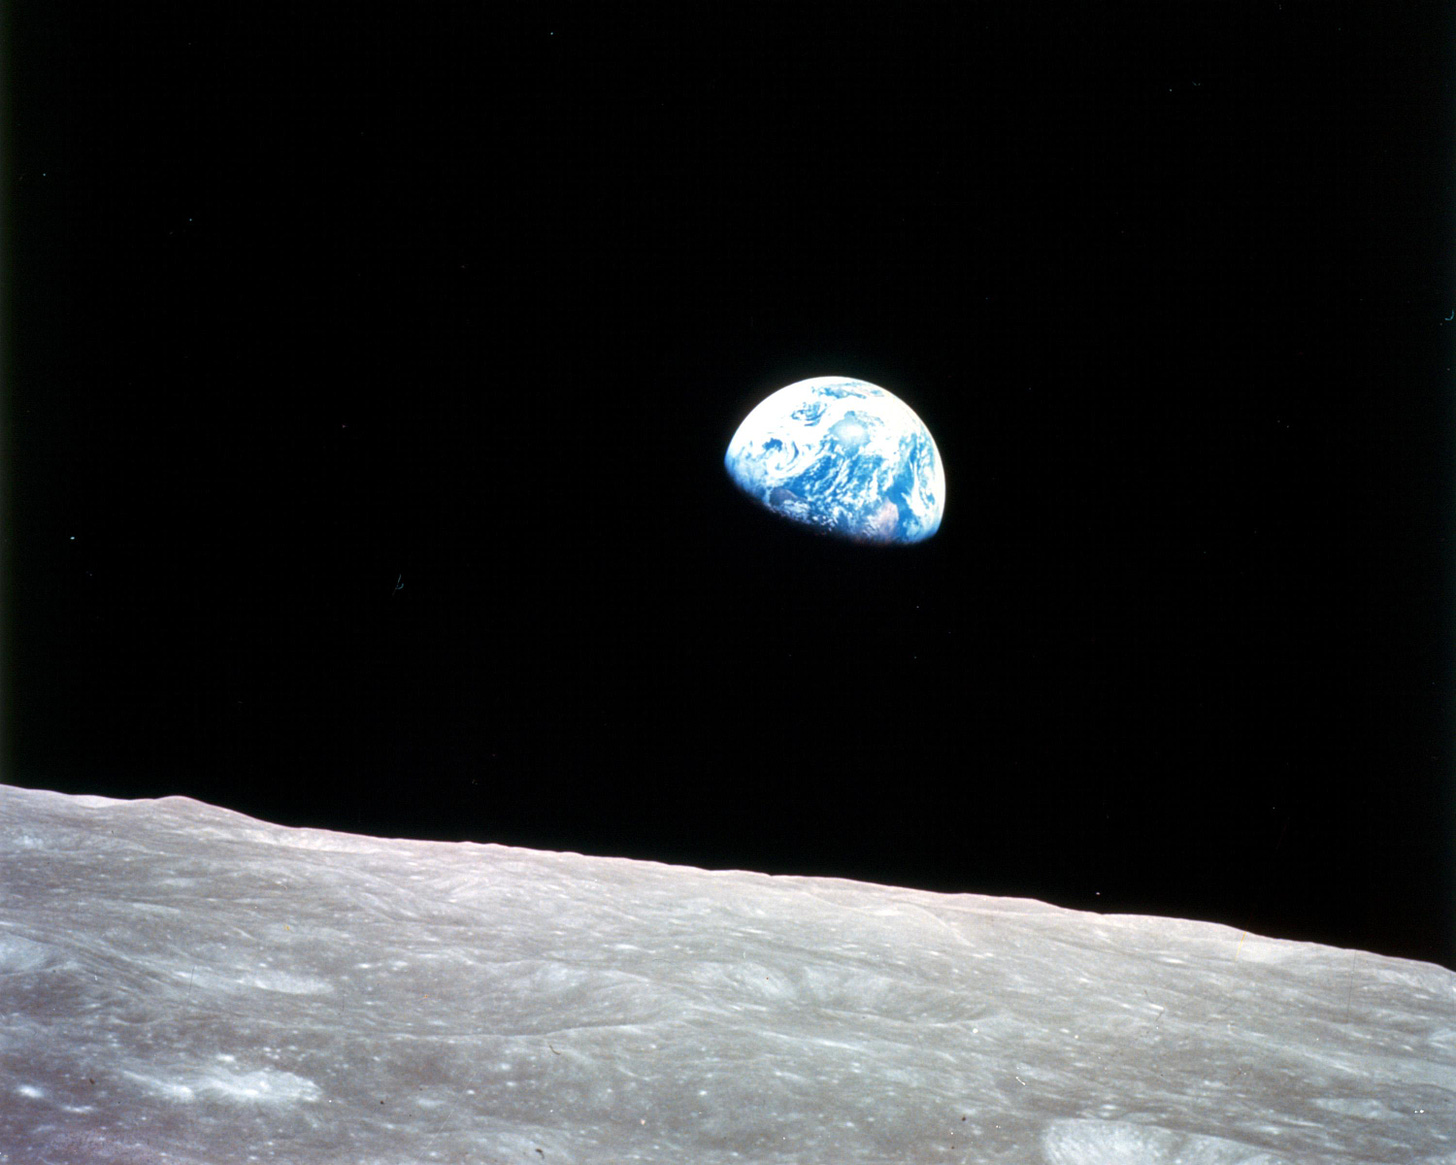 Apollo 8, the first manned mission to the moon, entered lunar orbit on Christmas Eve, Dec. 24, 1968. That evening, the astronauts-Commander Frank Borman, Command Module Pilot Jim Lovell, and Lunar Module Pilot William Anders-held a live broadcast from lunar orbit, in which they showed pictures of the Earth and moon as seen from their spacecraft.